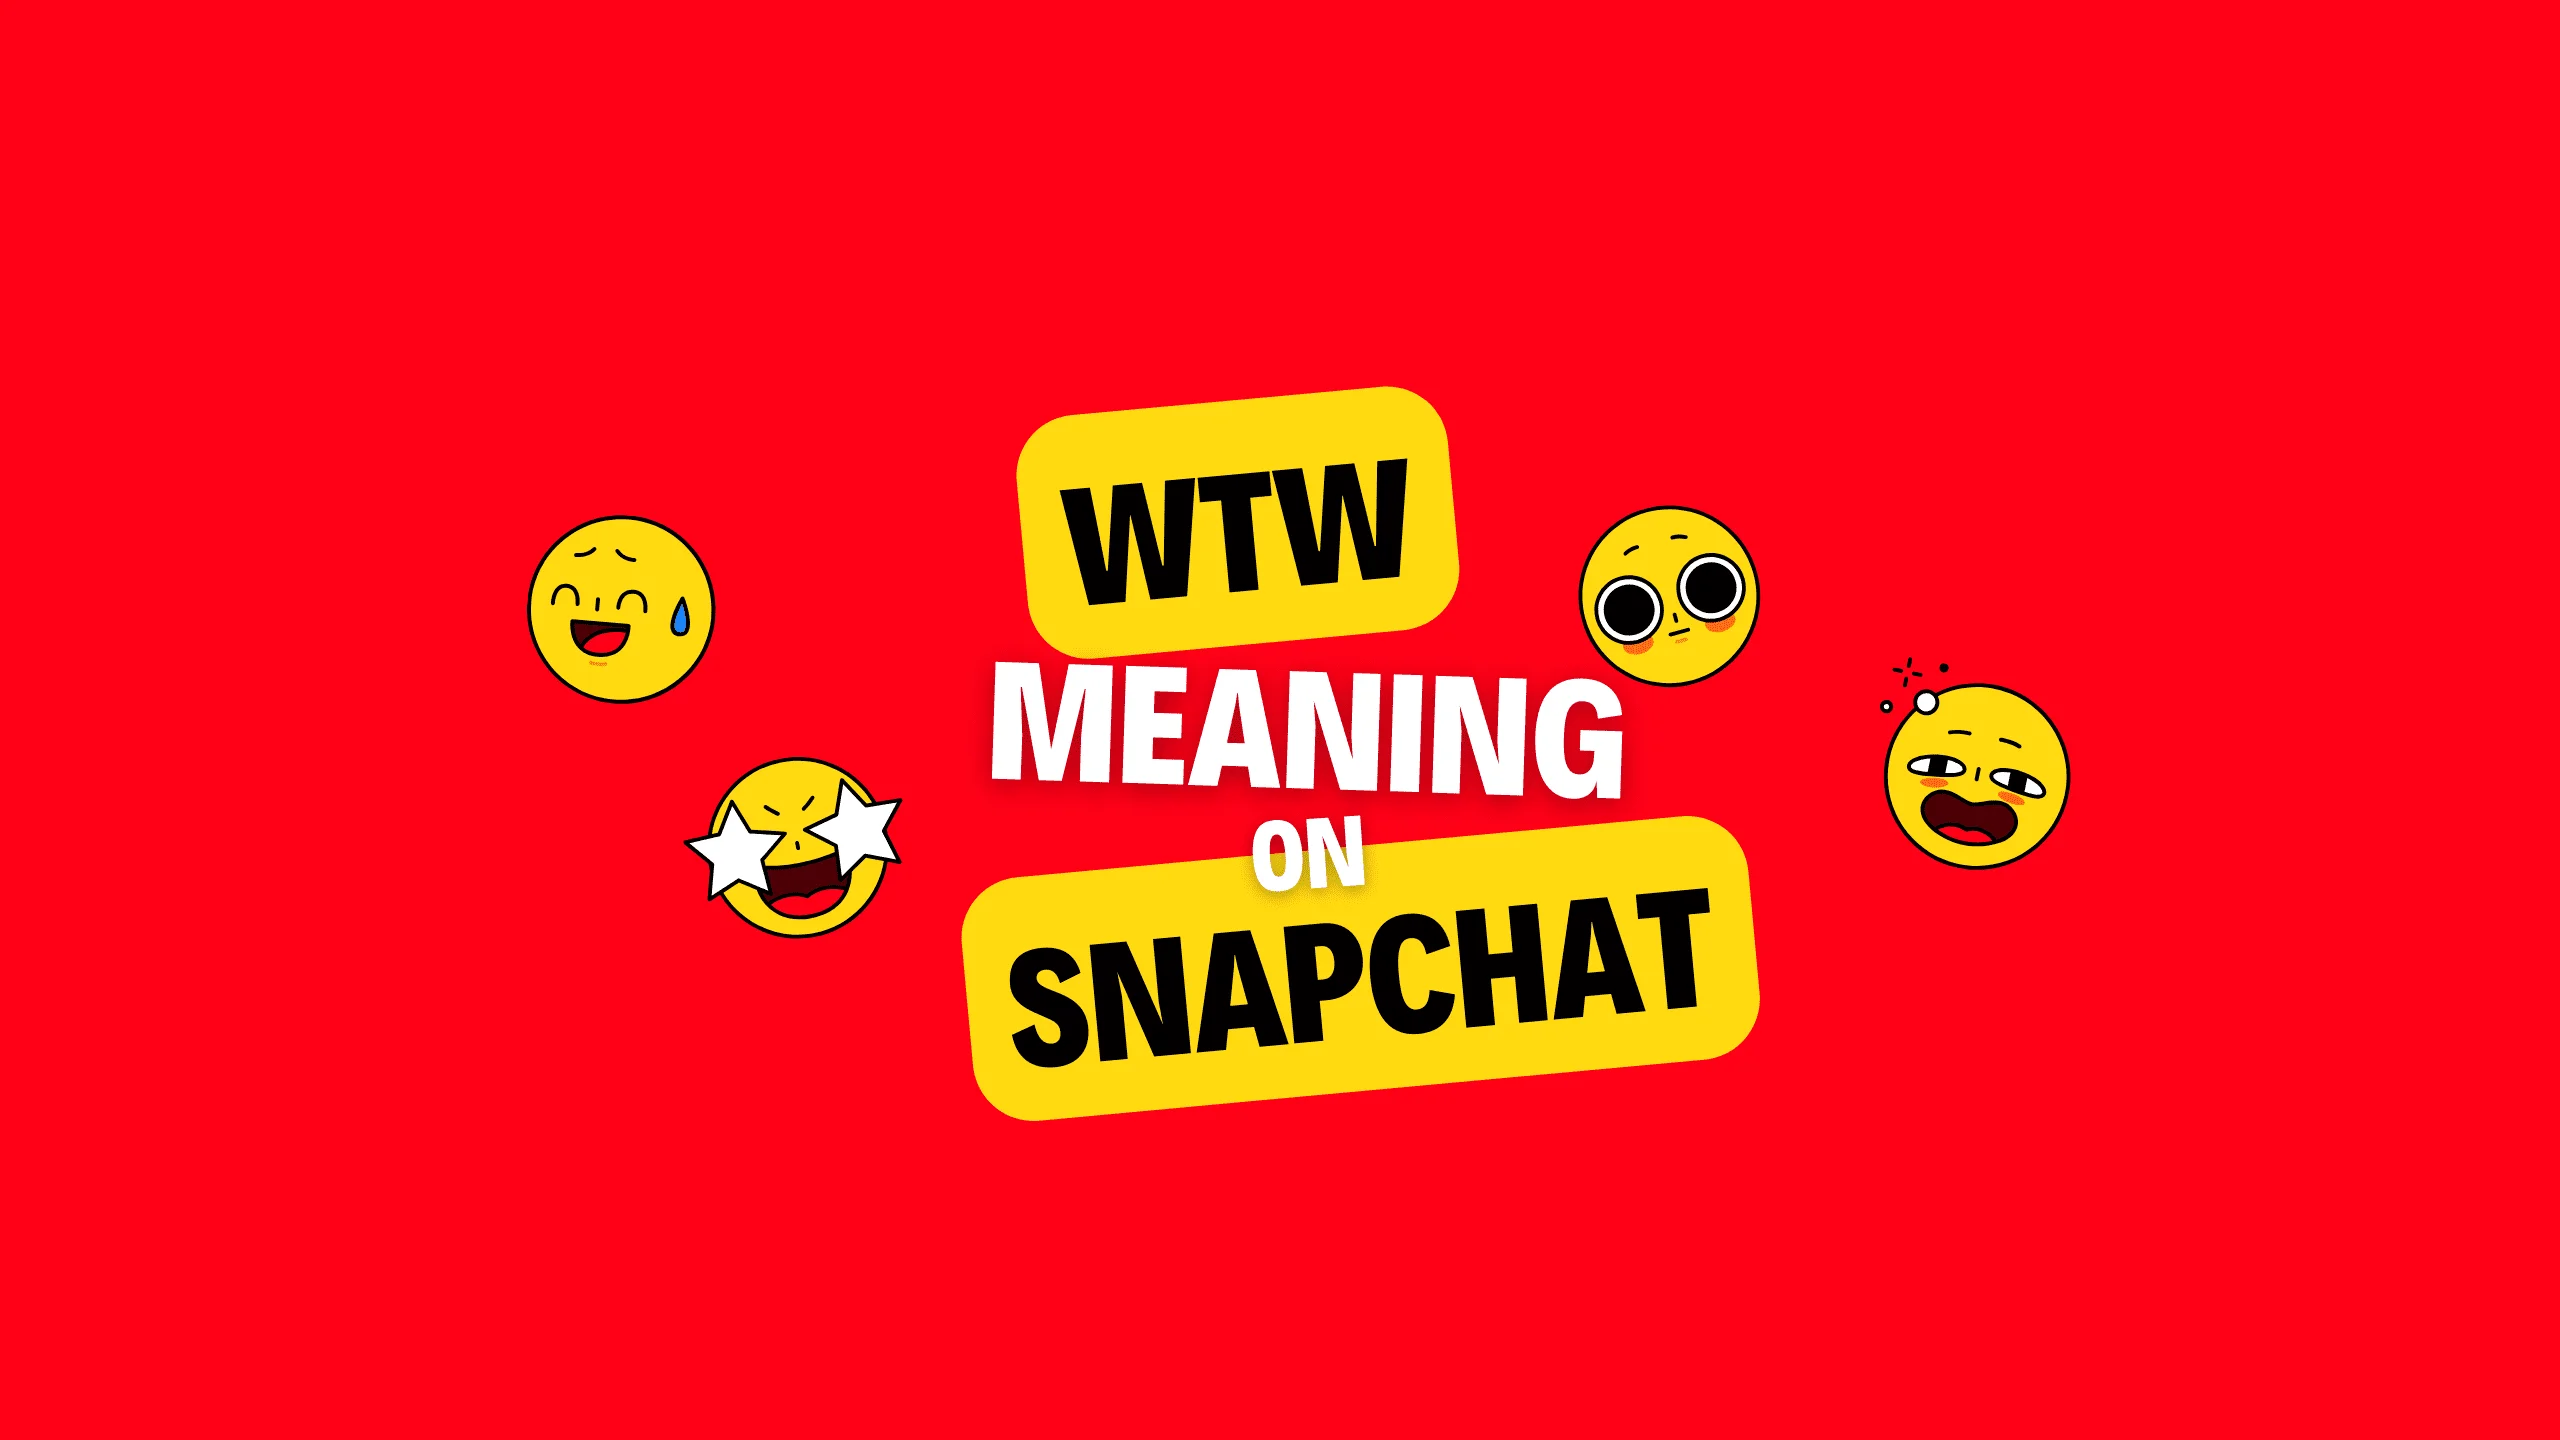 What does WTW mean on Snapchat